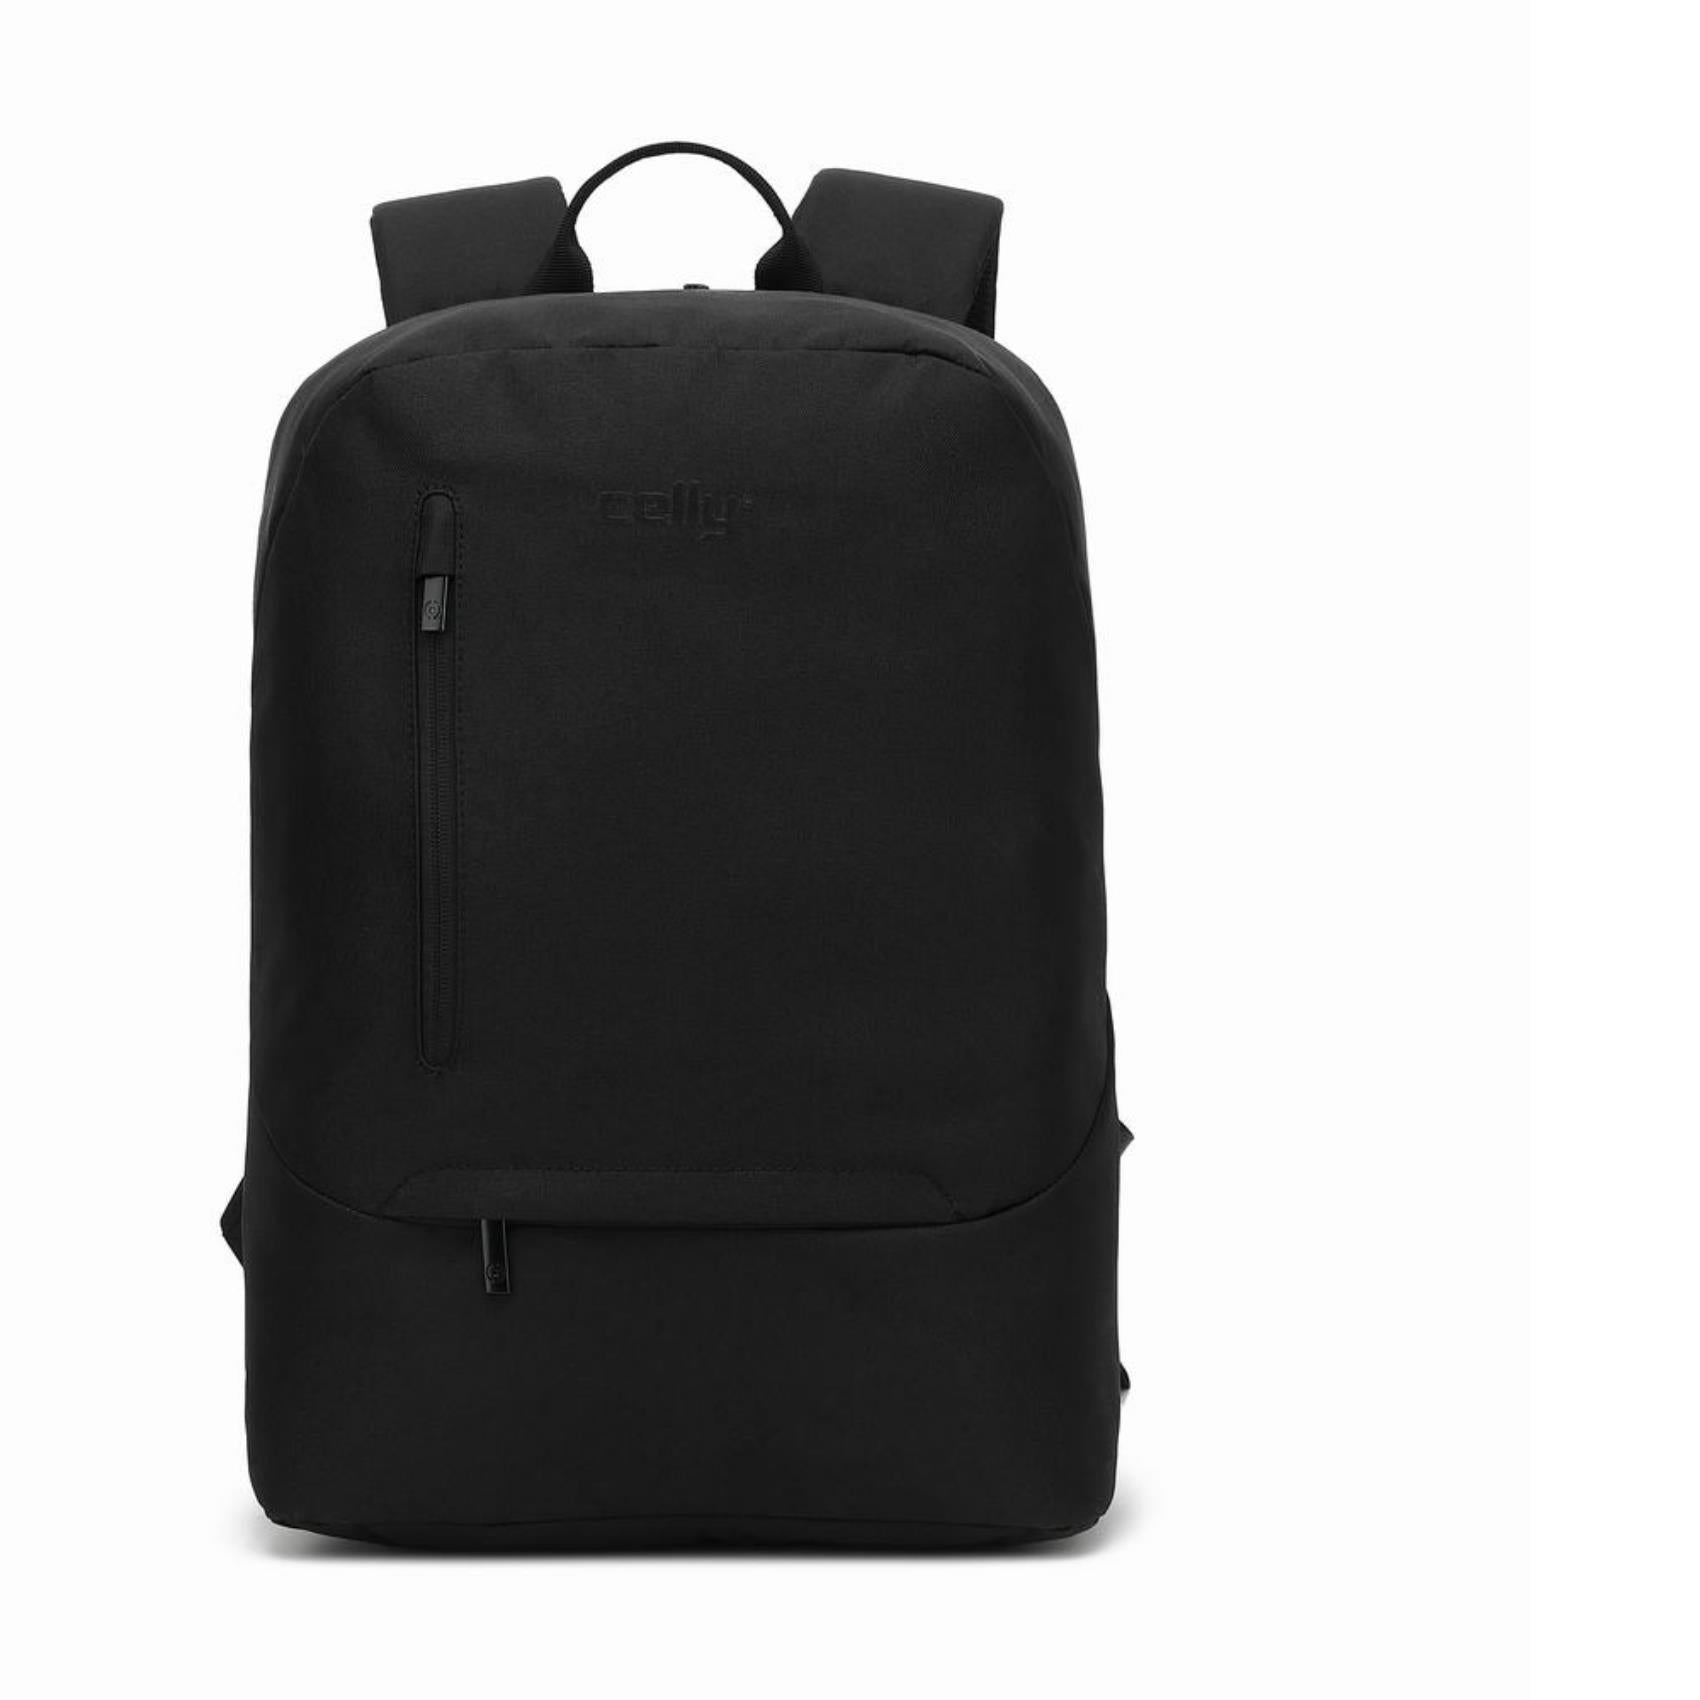 Celly BACKPACK FOR TRAVEL BLACK